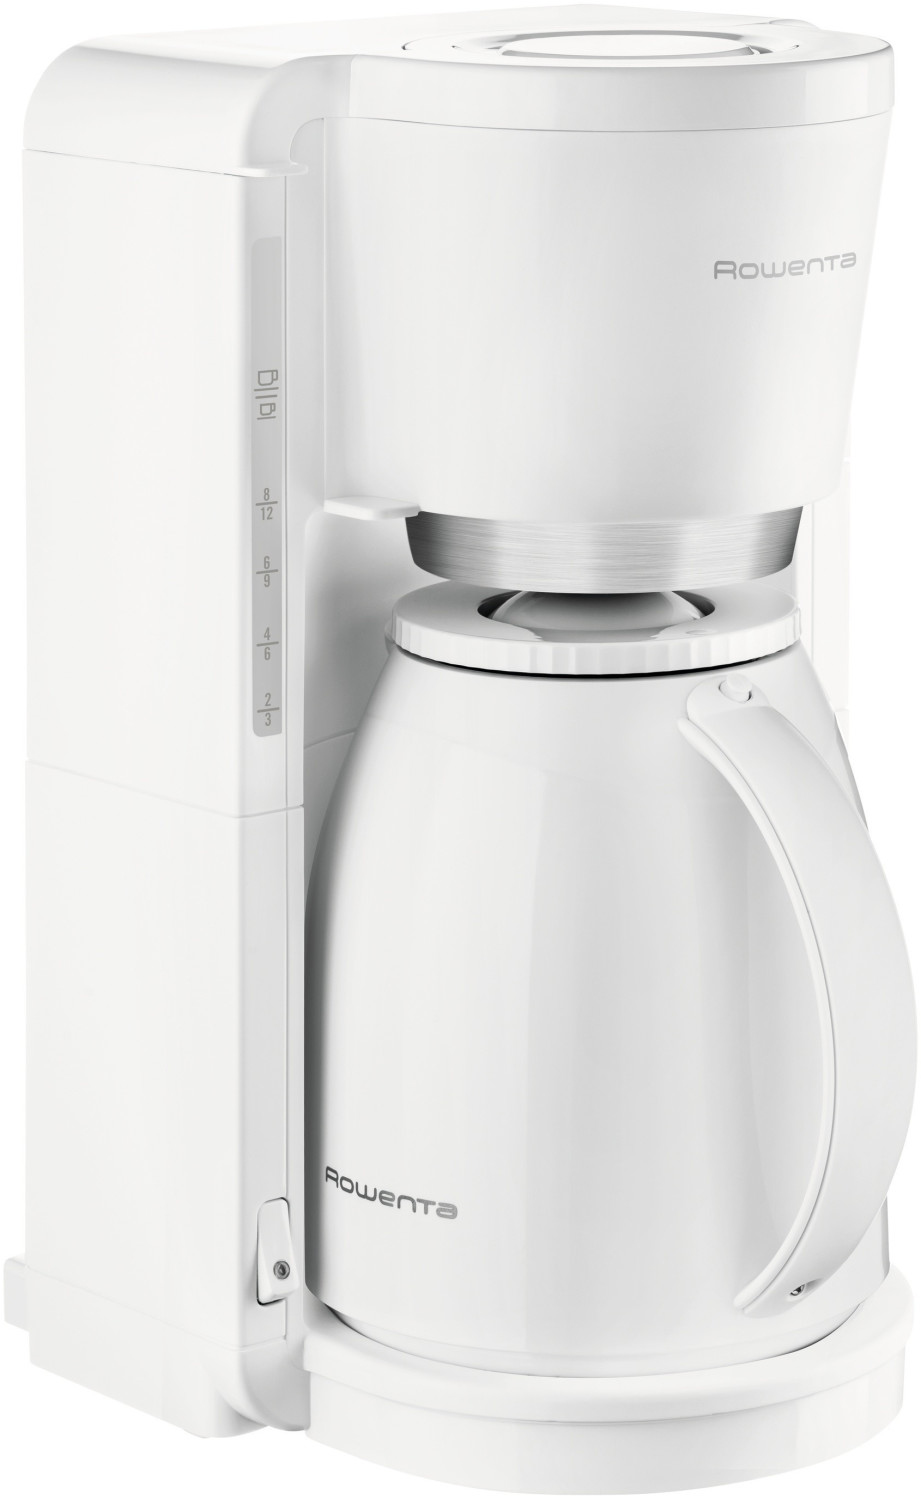 Cafetiere filtre Isotherme CONTINENTAL EDISON